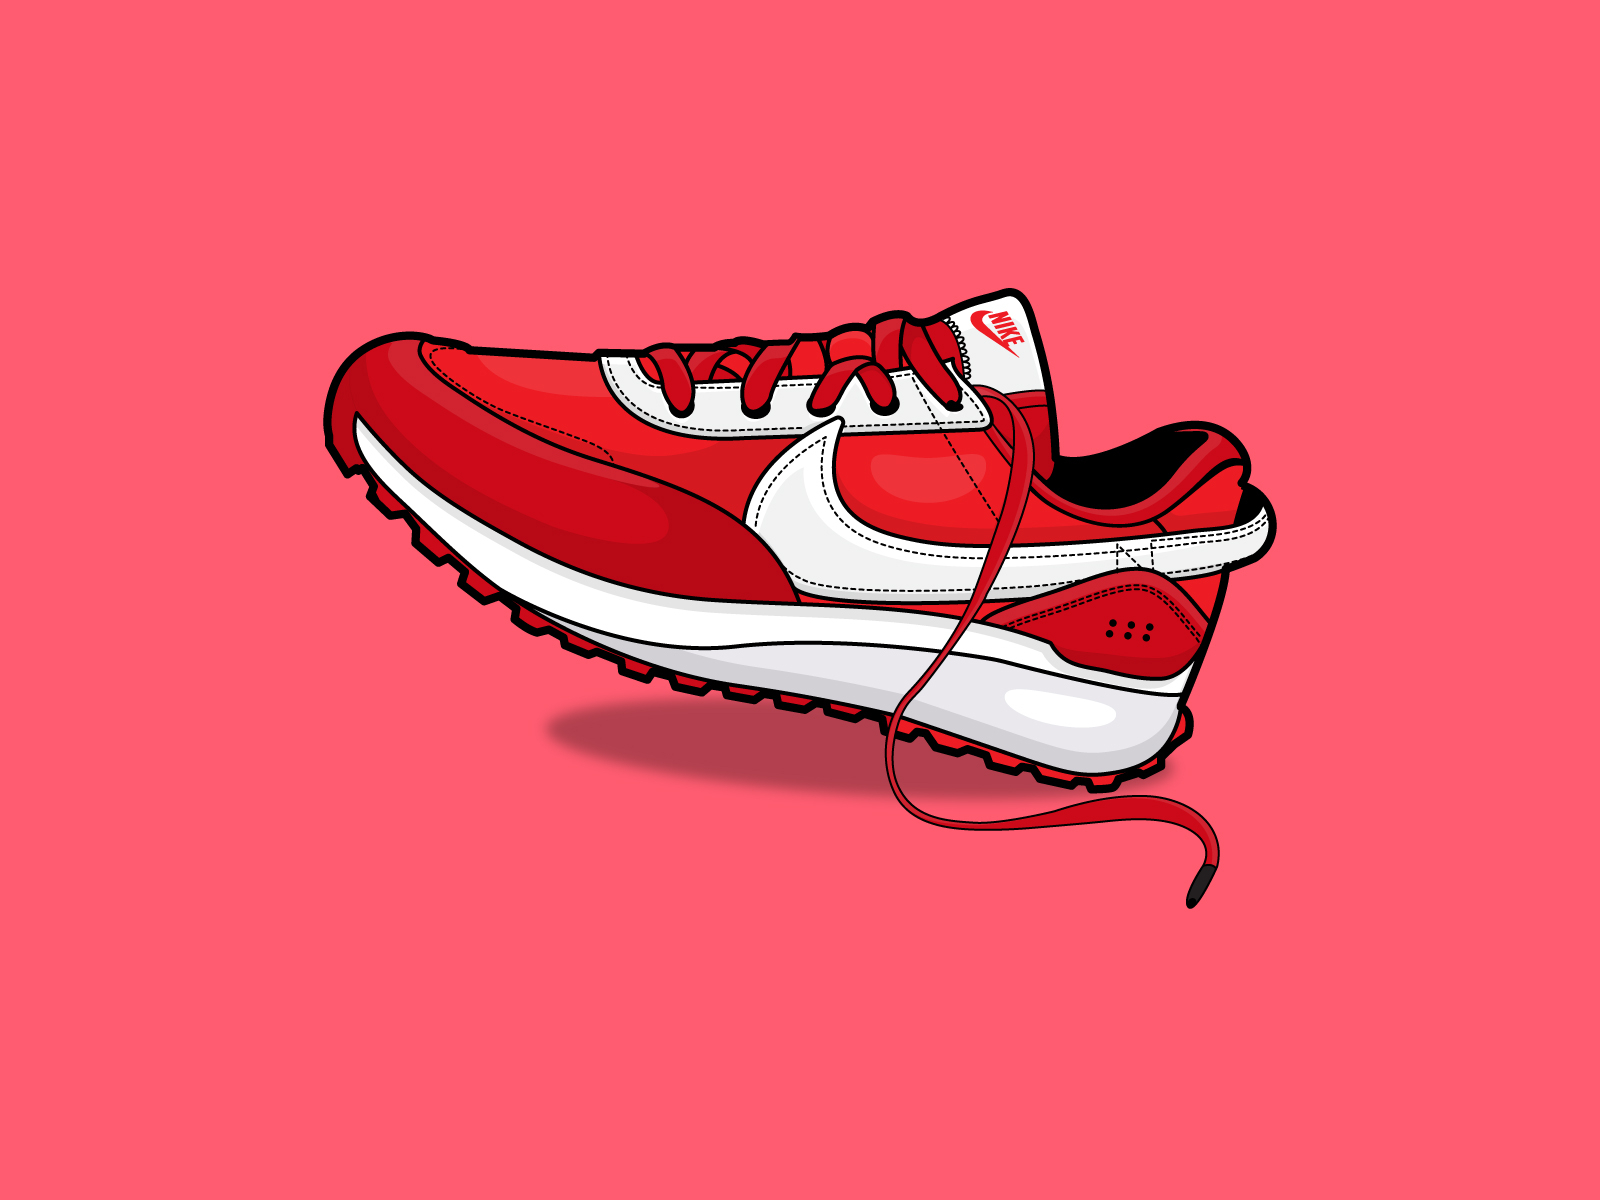 NIKE SHOES by Sumi Akter on Dribbble